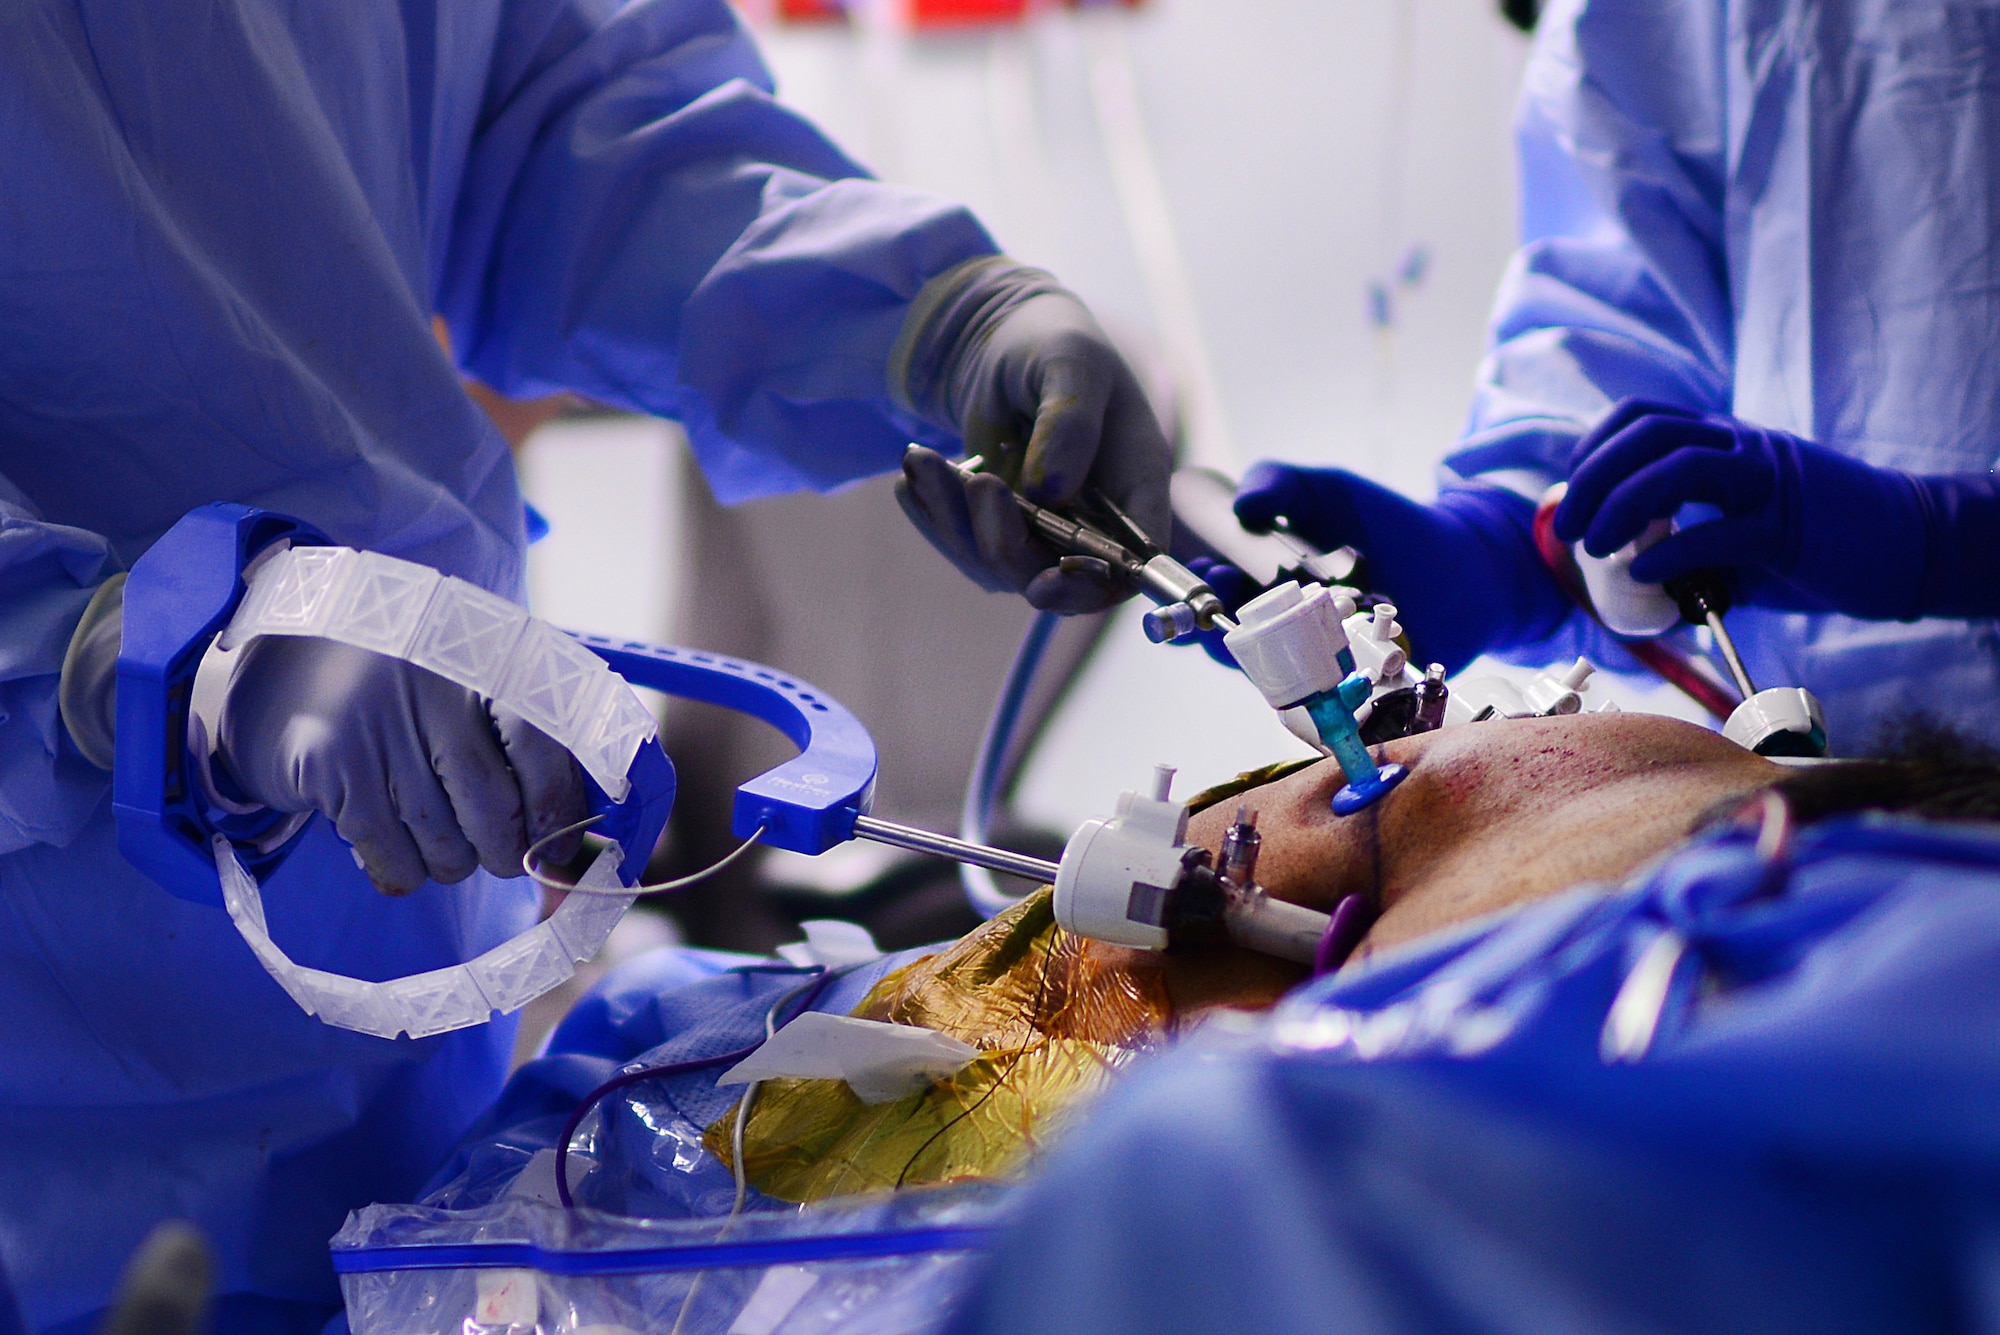 U.S. Air Force Major Richard Knight, Diplomate of the American Board of Urology, Chief of Surgery at the 48th Medical Group, uses FlexDex surgical technology to suture during a laparoscopic radical prostatectomy surgery at Royal Air Force Lakenheath, England Oct. 18, 2018. The FlexDex surgical platform precisely transforms the surgeon’s hand, wrist, and arm movements outside the patient into conforming actions of an end-effector inside the patient’s body. (U.S. Air Force photo/ Tech. Matthew Plew)